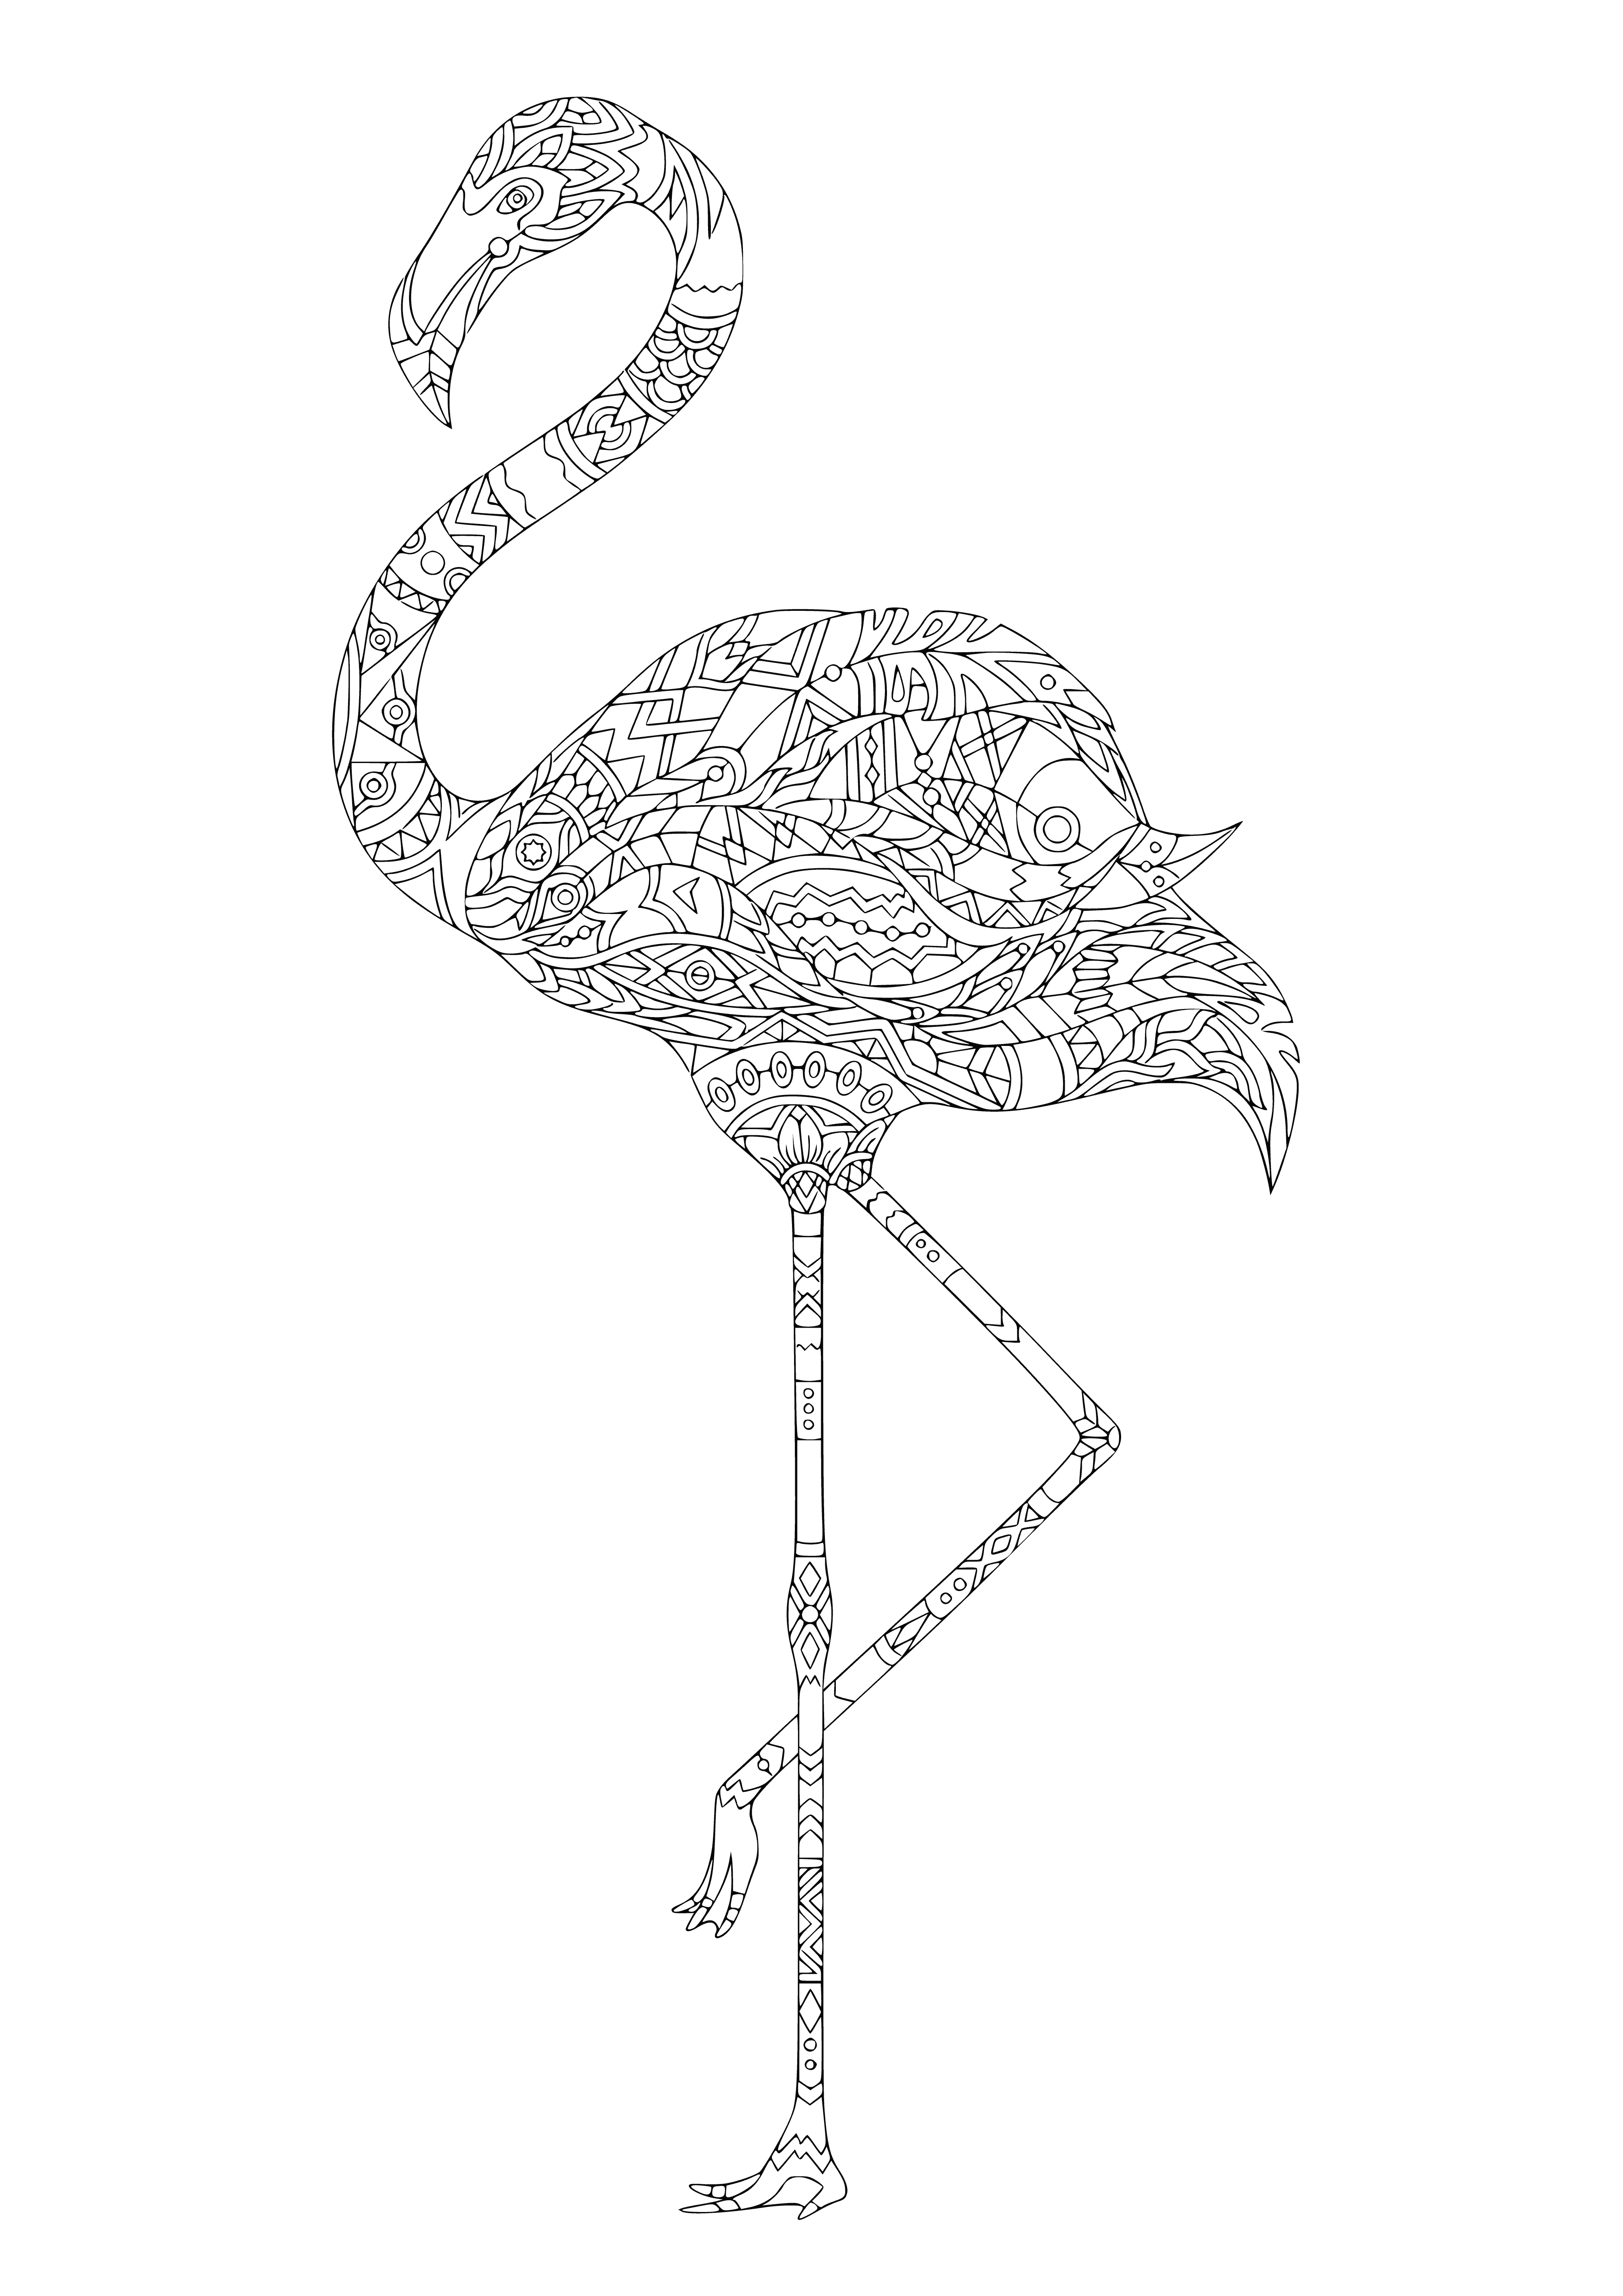 coloring page: A tall pink bird with open beak stands in shallow water, its wings and webbed feet spread out.